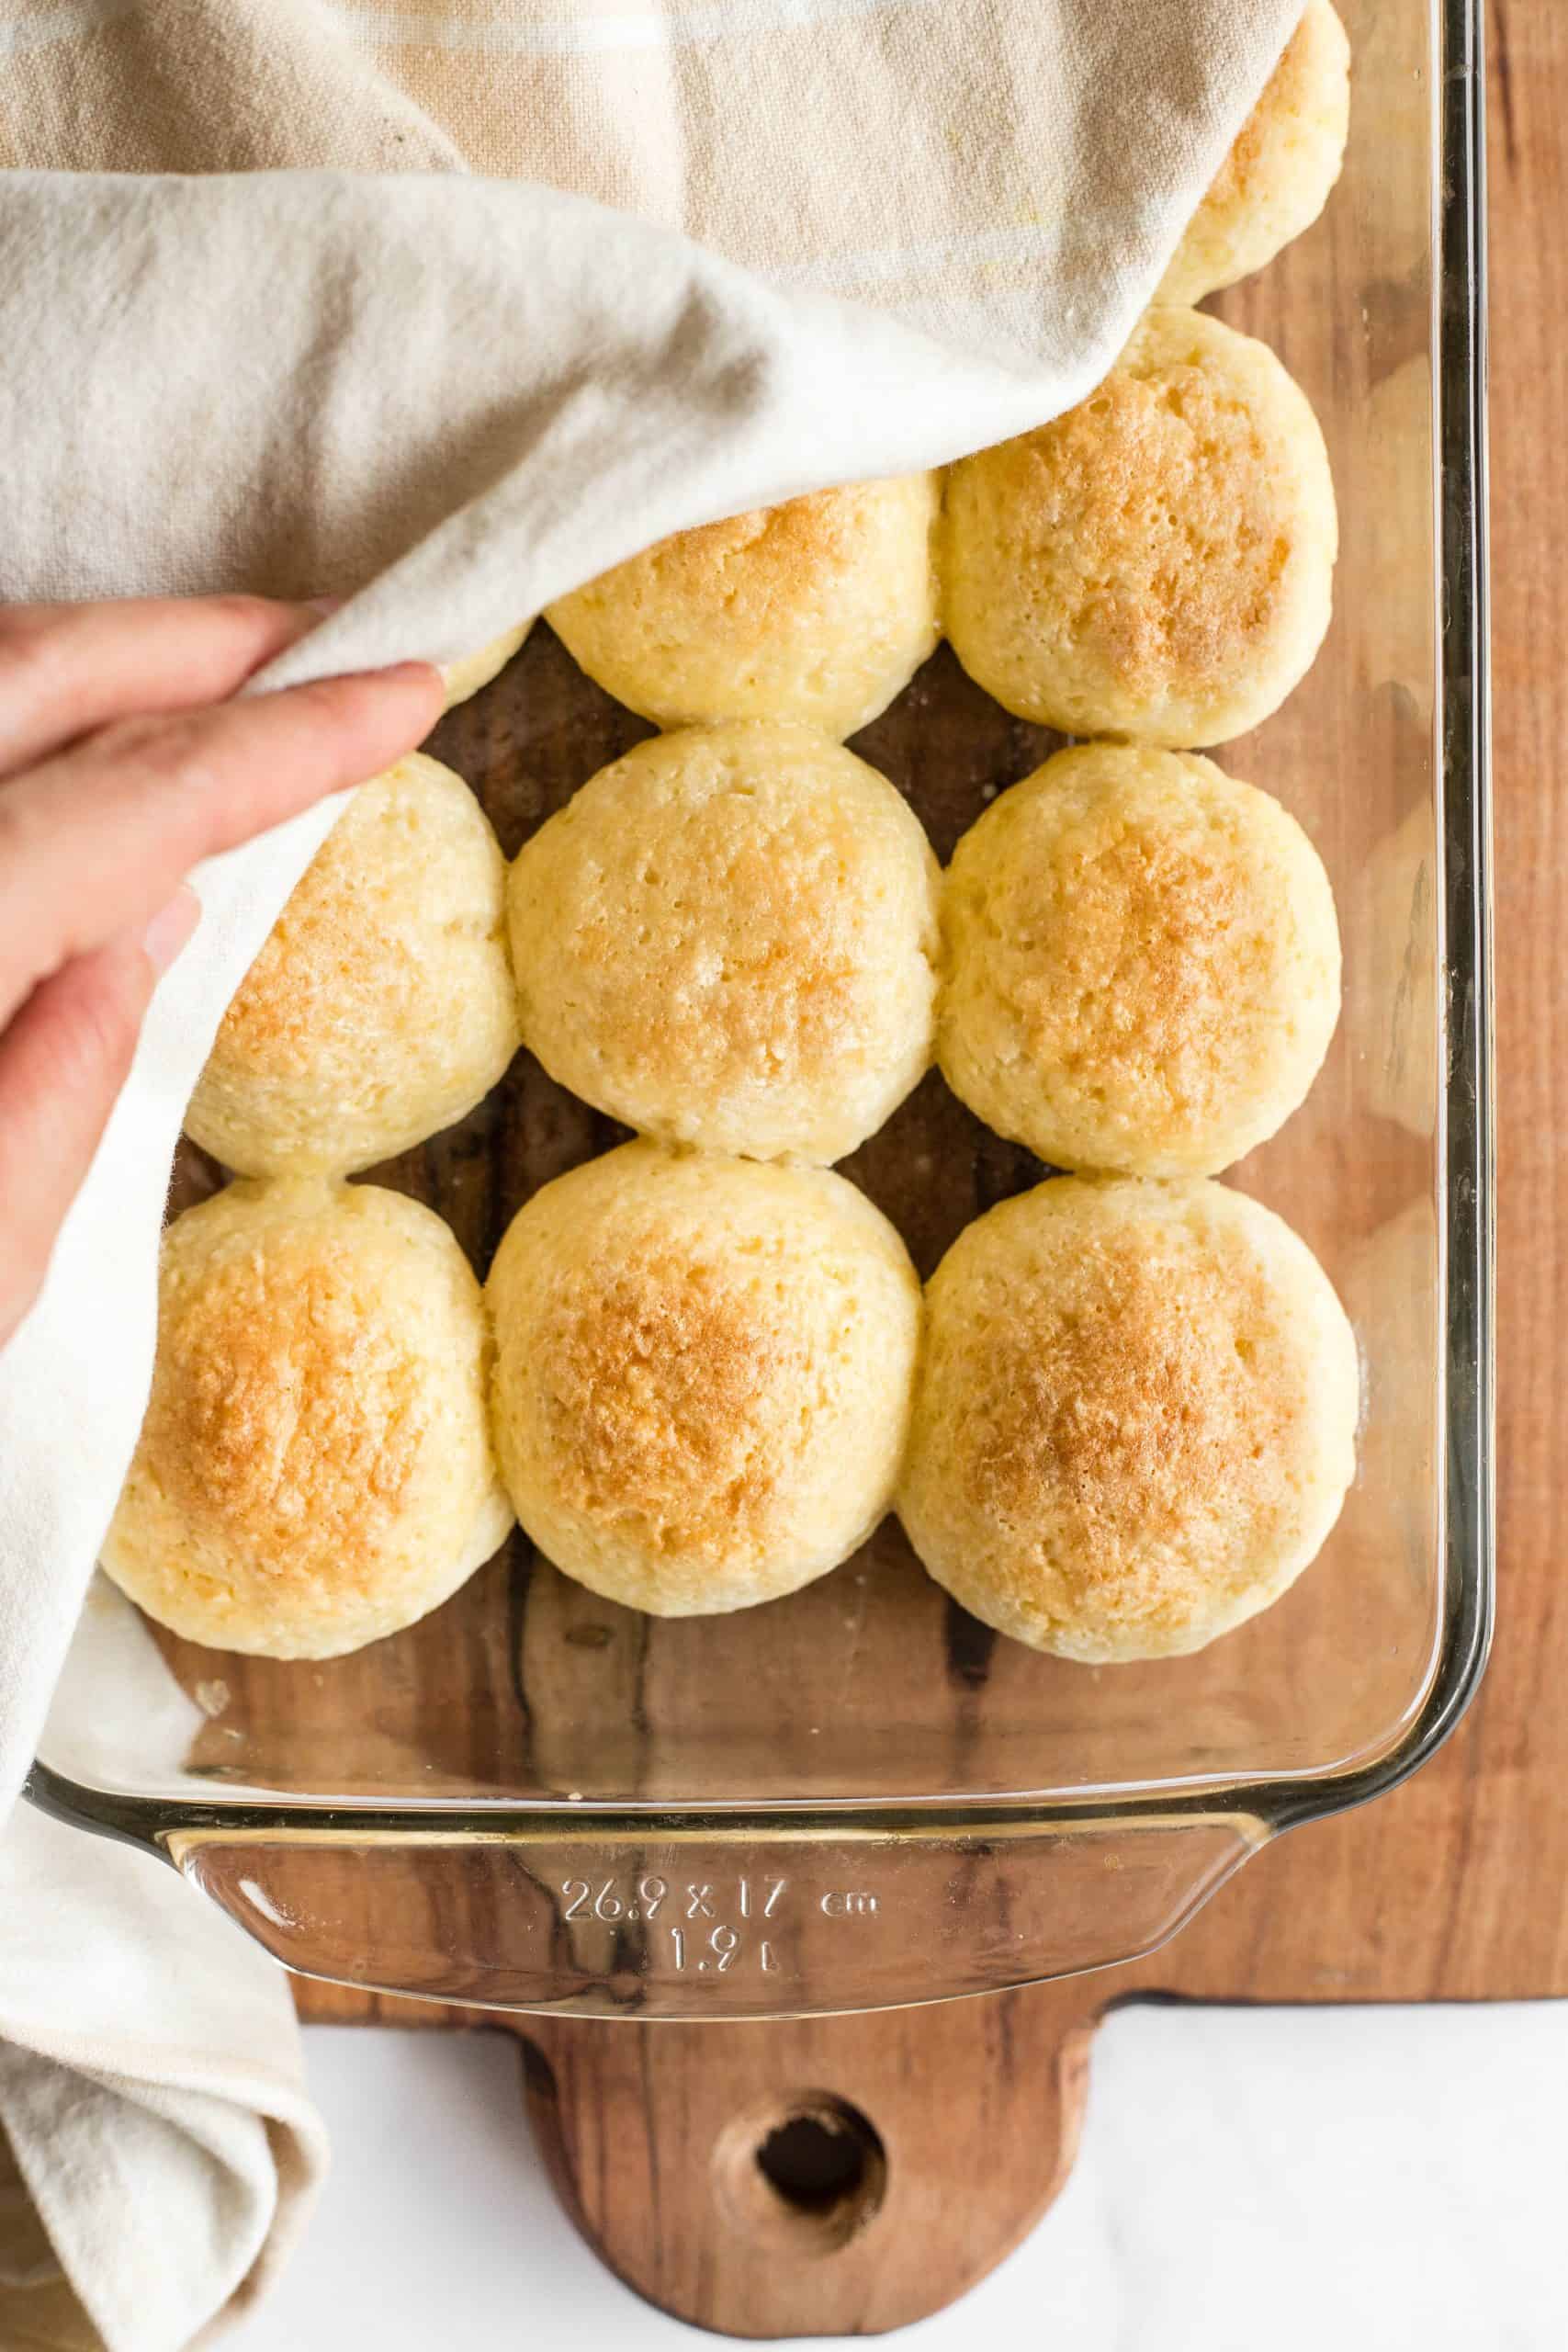 Removing a kitchen towel covering a glass pan full of dinner rolls.